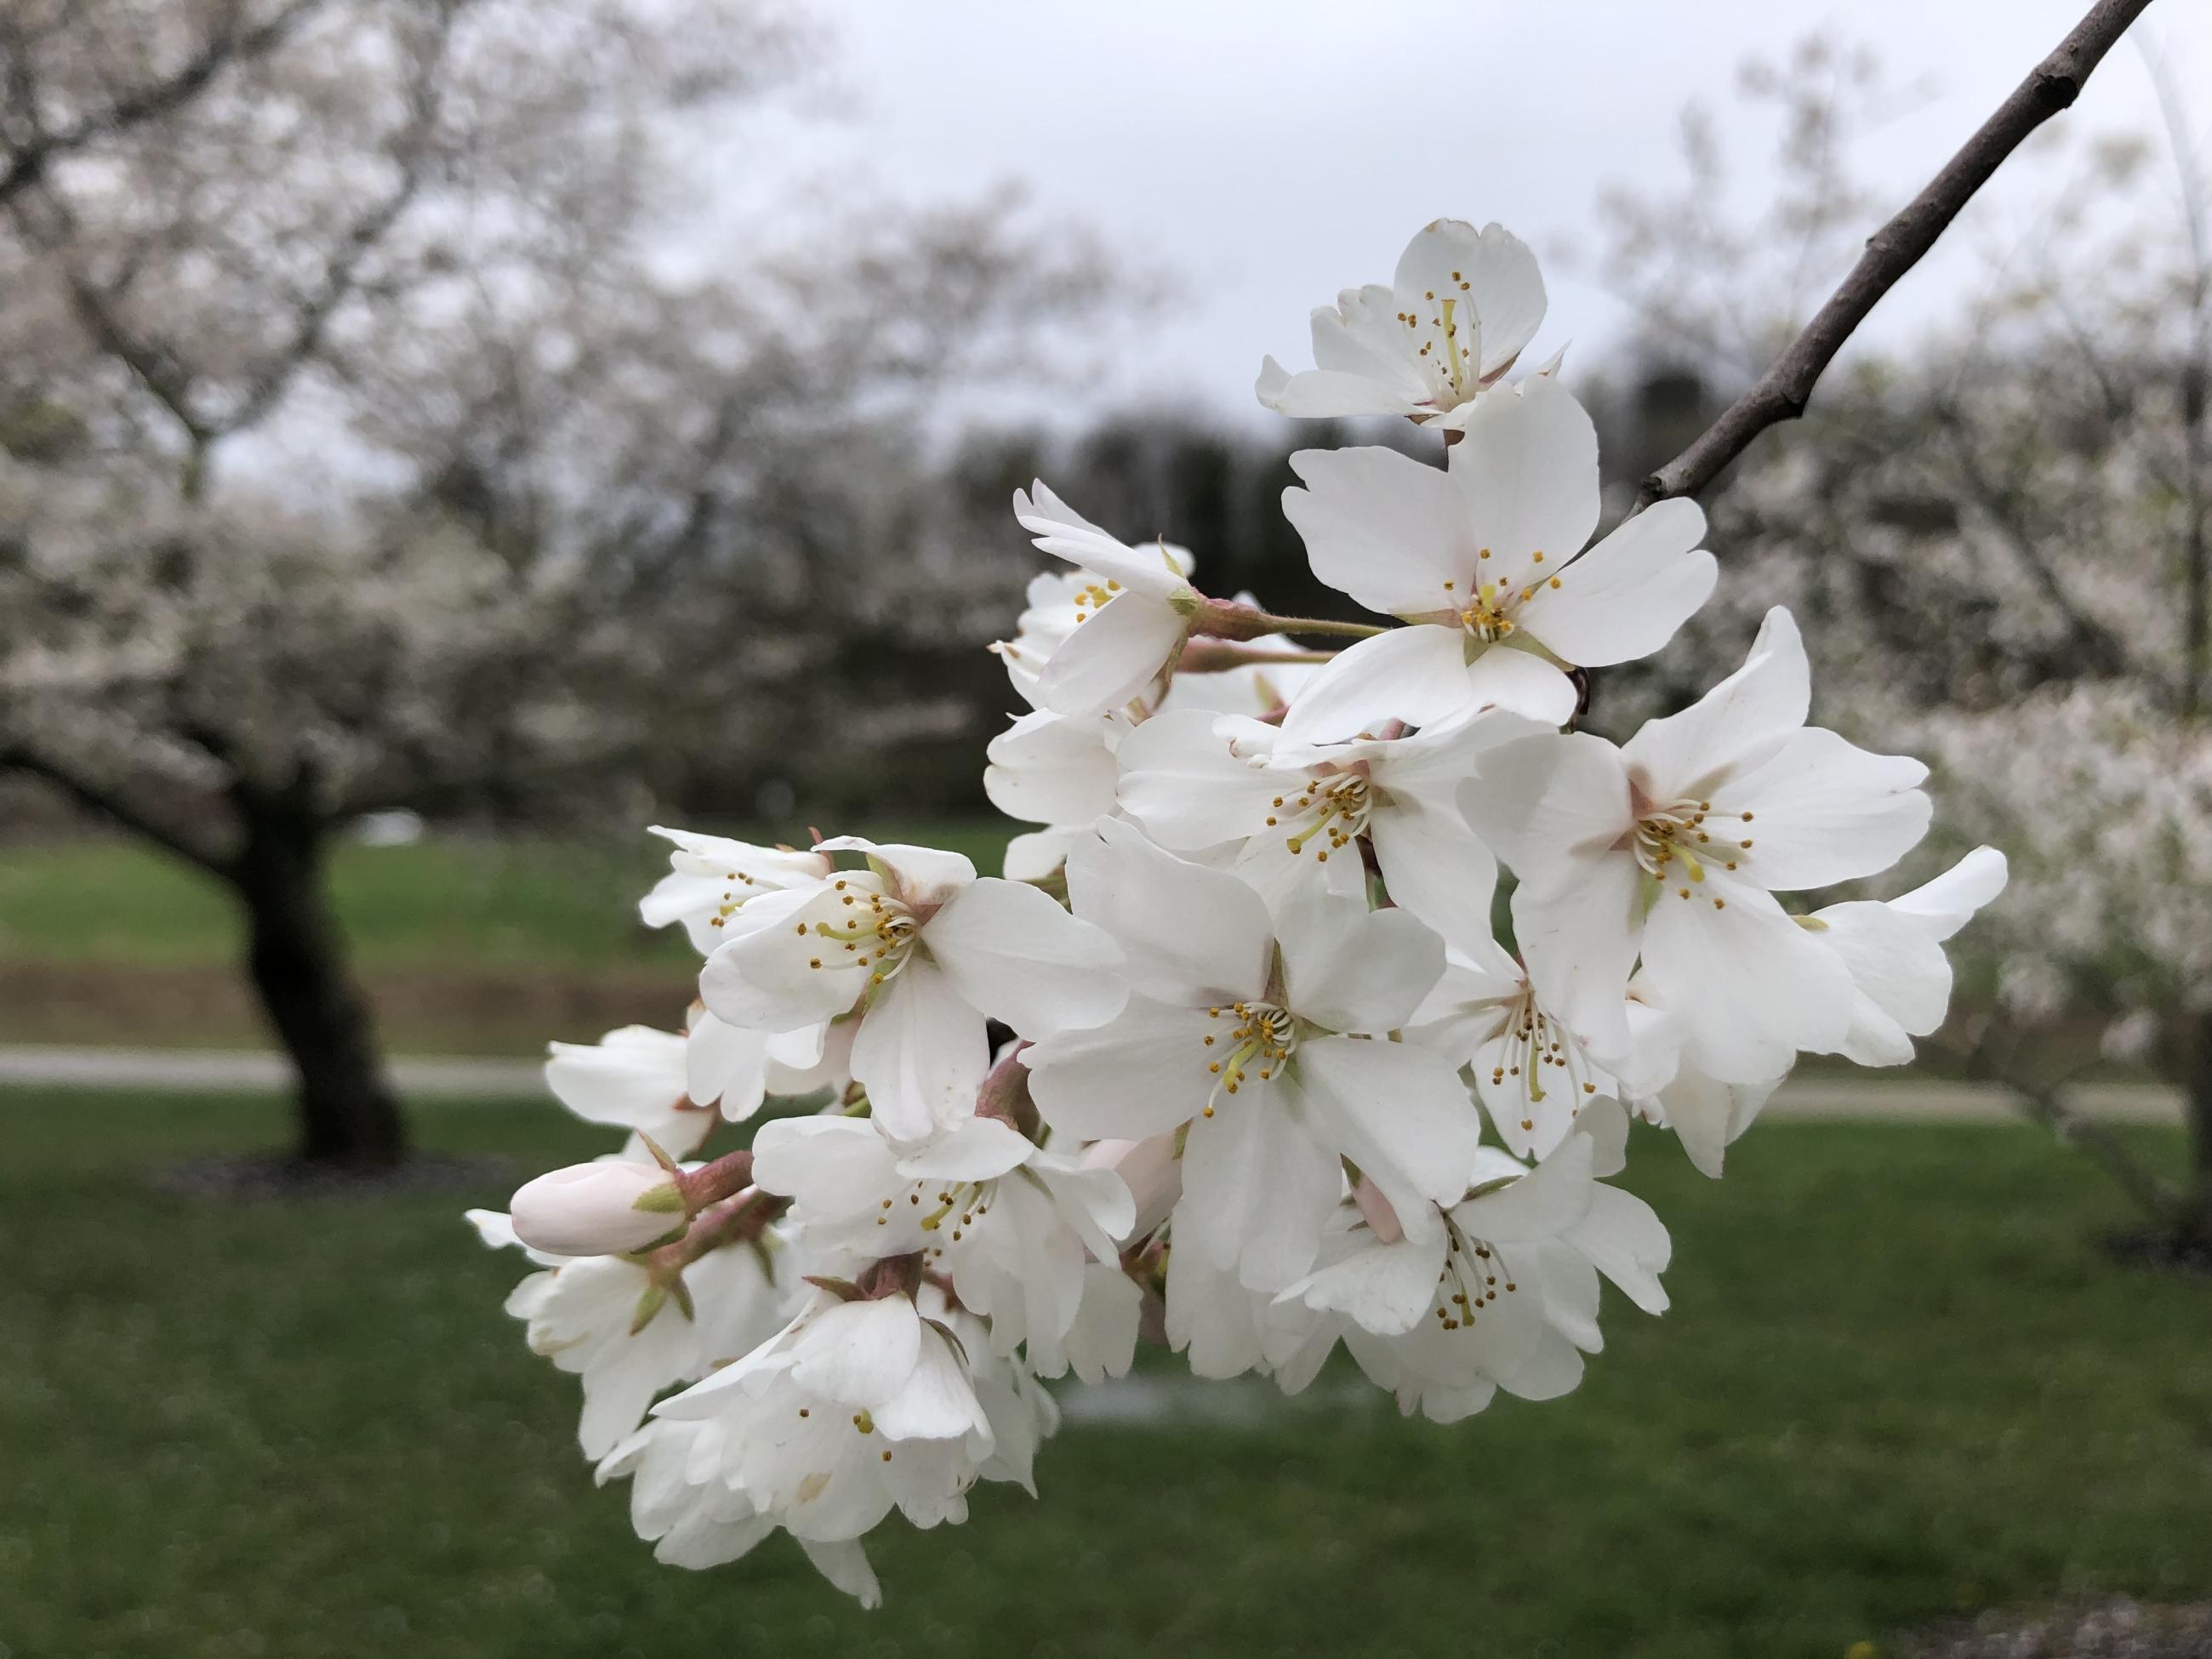 Up-close picture of cherry tree branch with blossoms